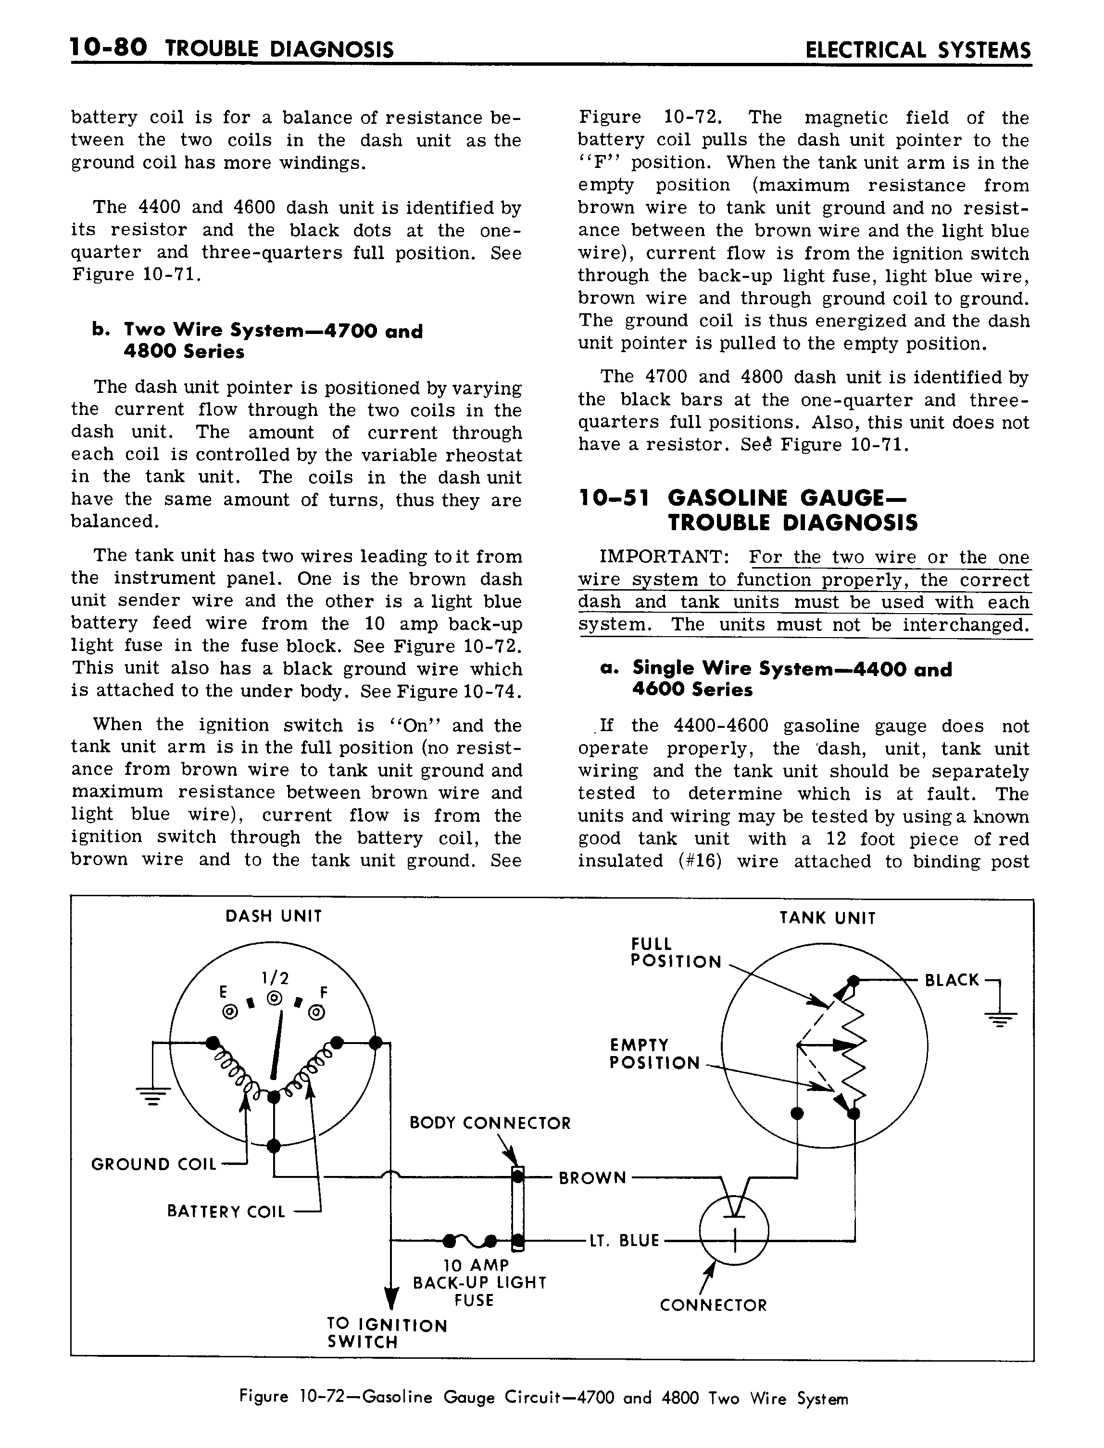 n_10 1961 Buick Shop Manual - Electrical Systems-080-080.jpg